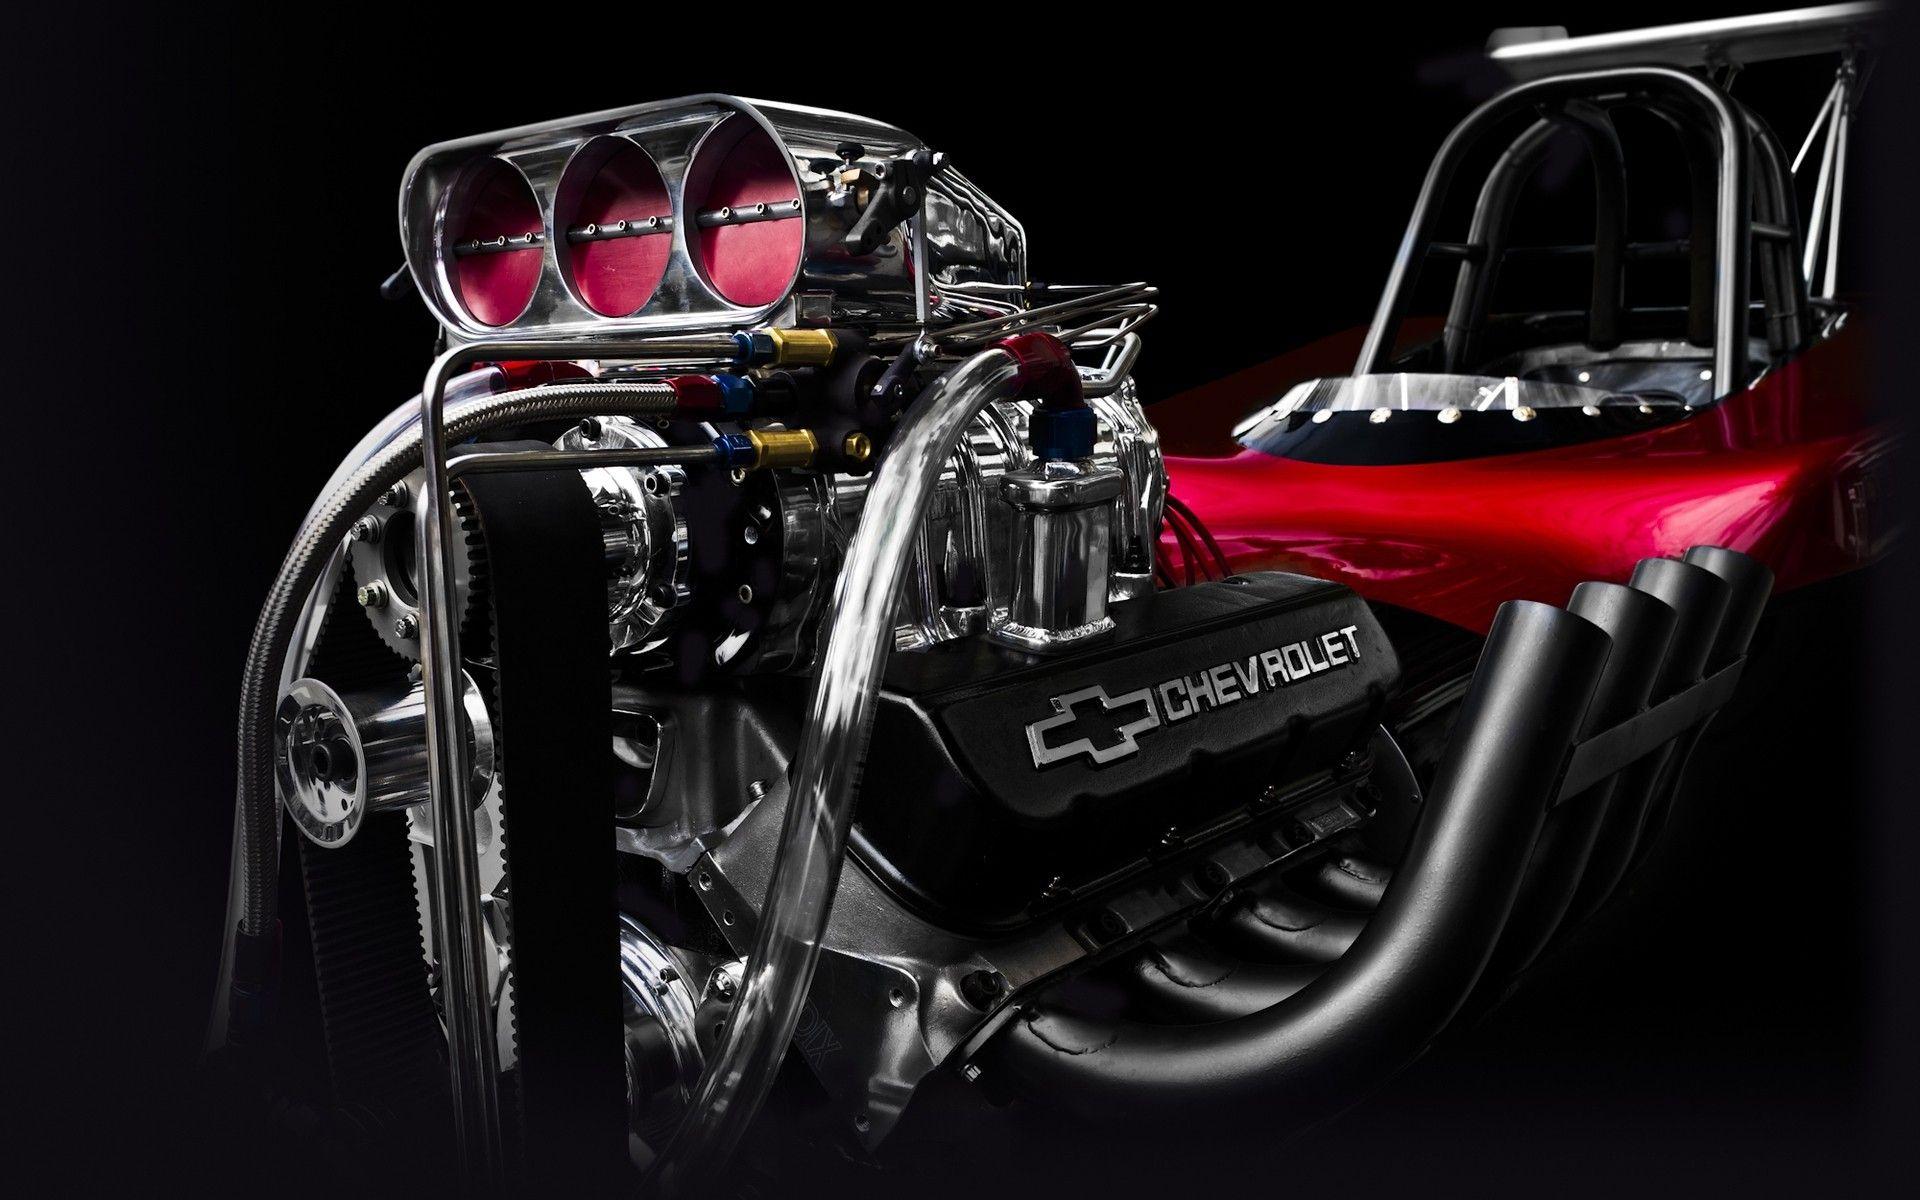 engines, Motors, Technology, Engine Exhaust, Chevrolet, Pipes